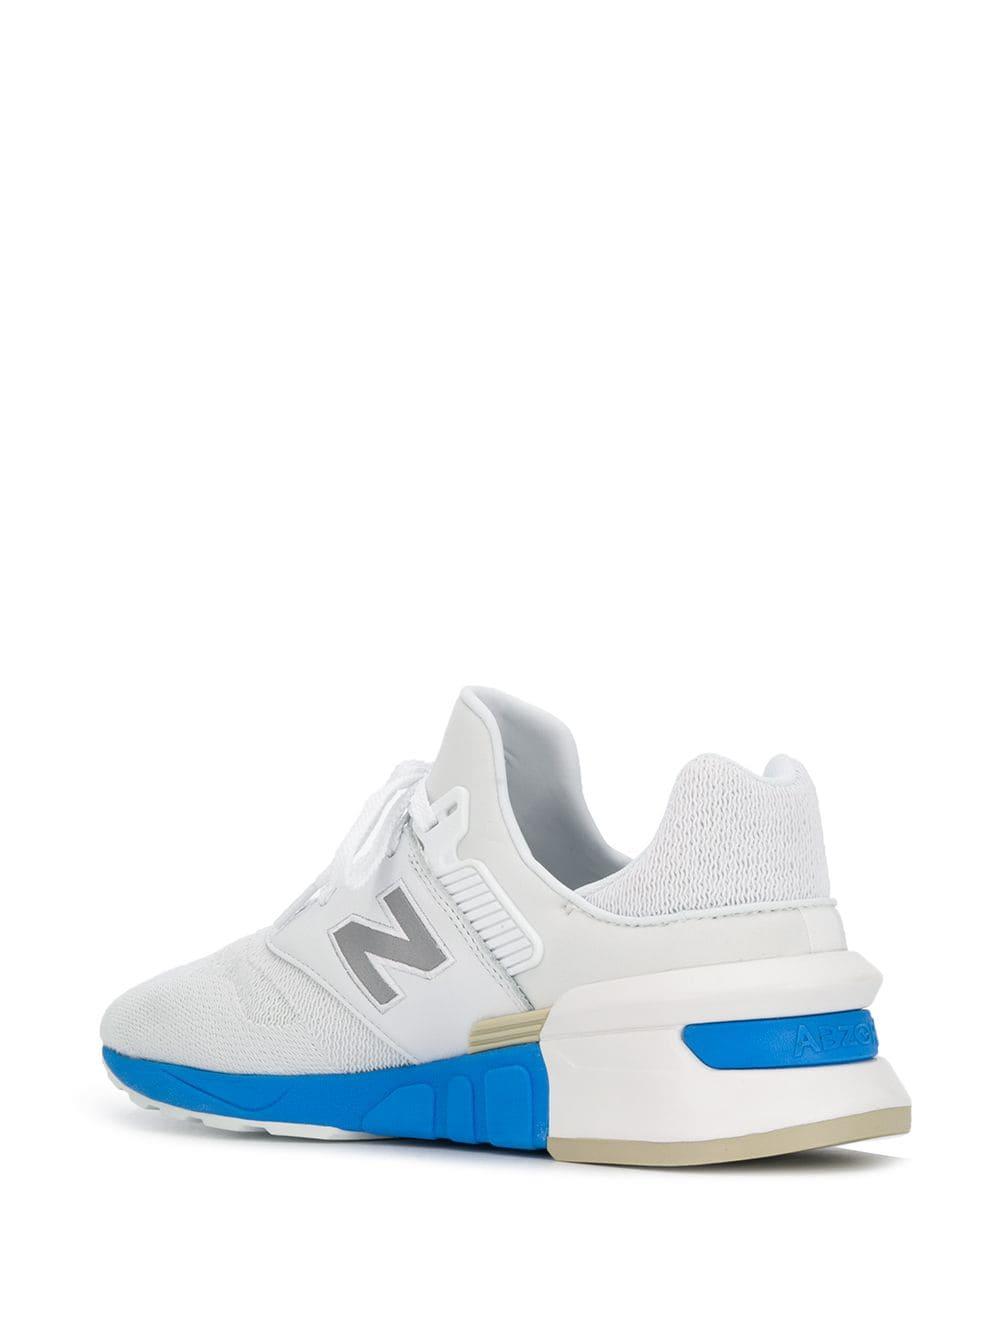 New Balance Leather Encap Reveal Sneakers in White for Men - Lyst